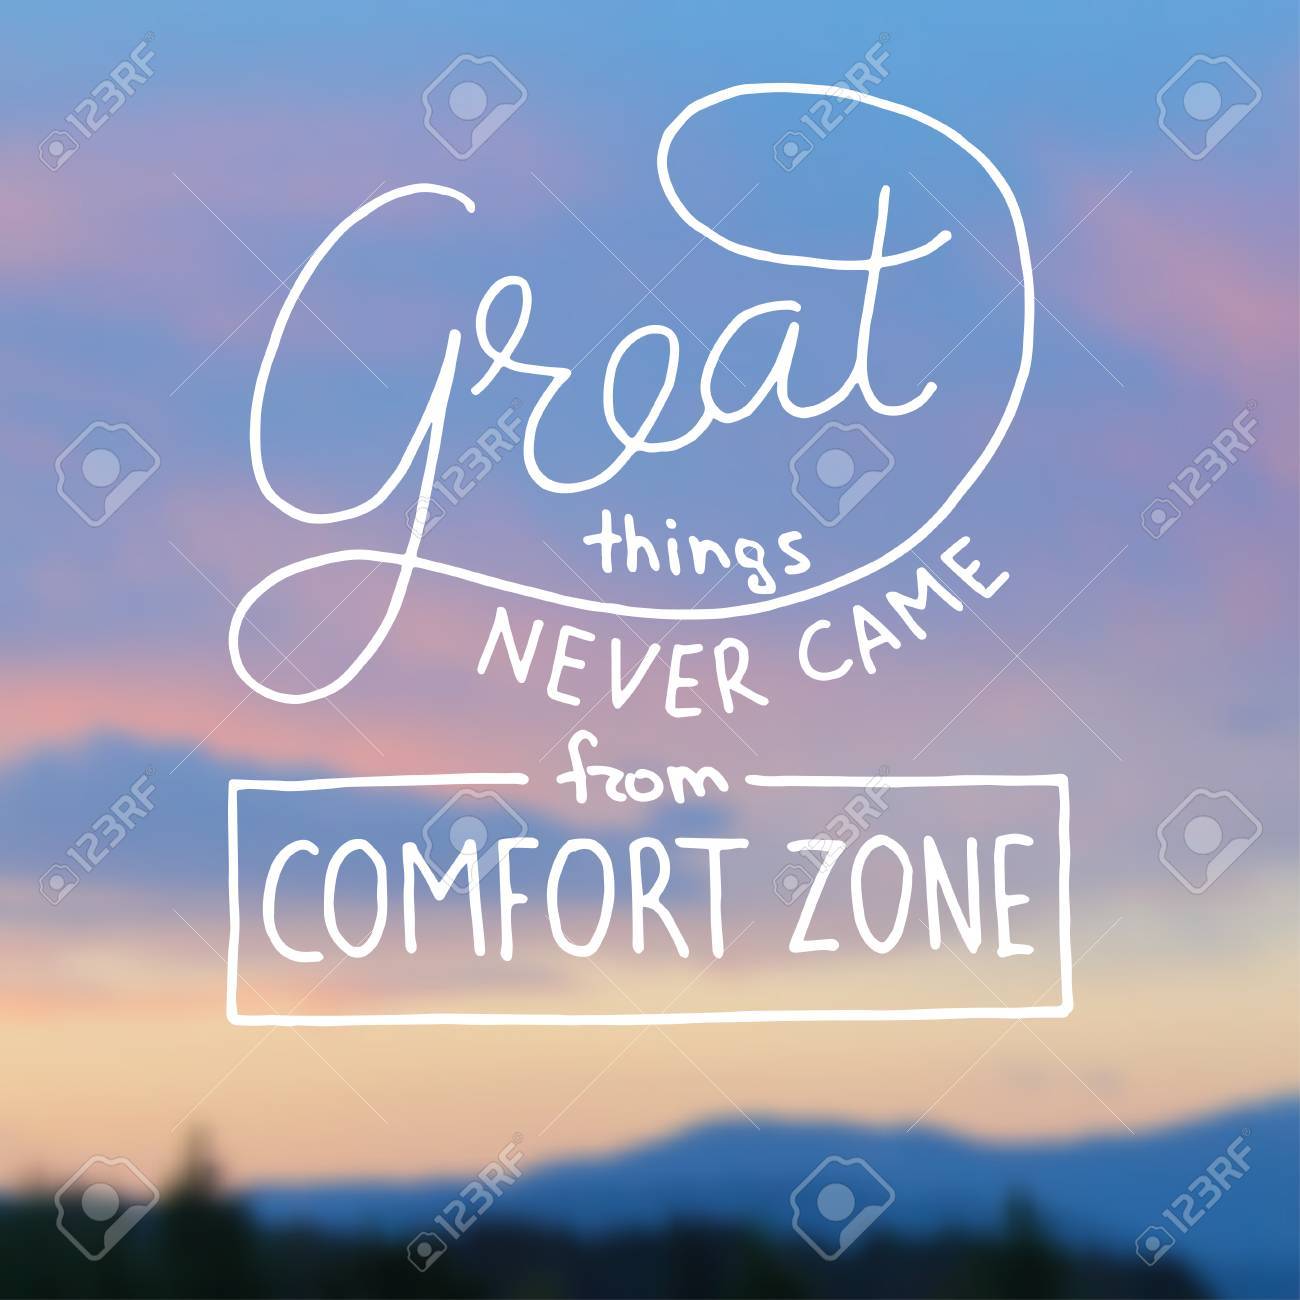 Great Things Never Came From Fort Zone Hand Lettering On